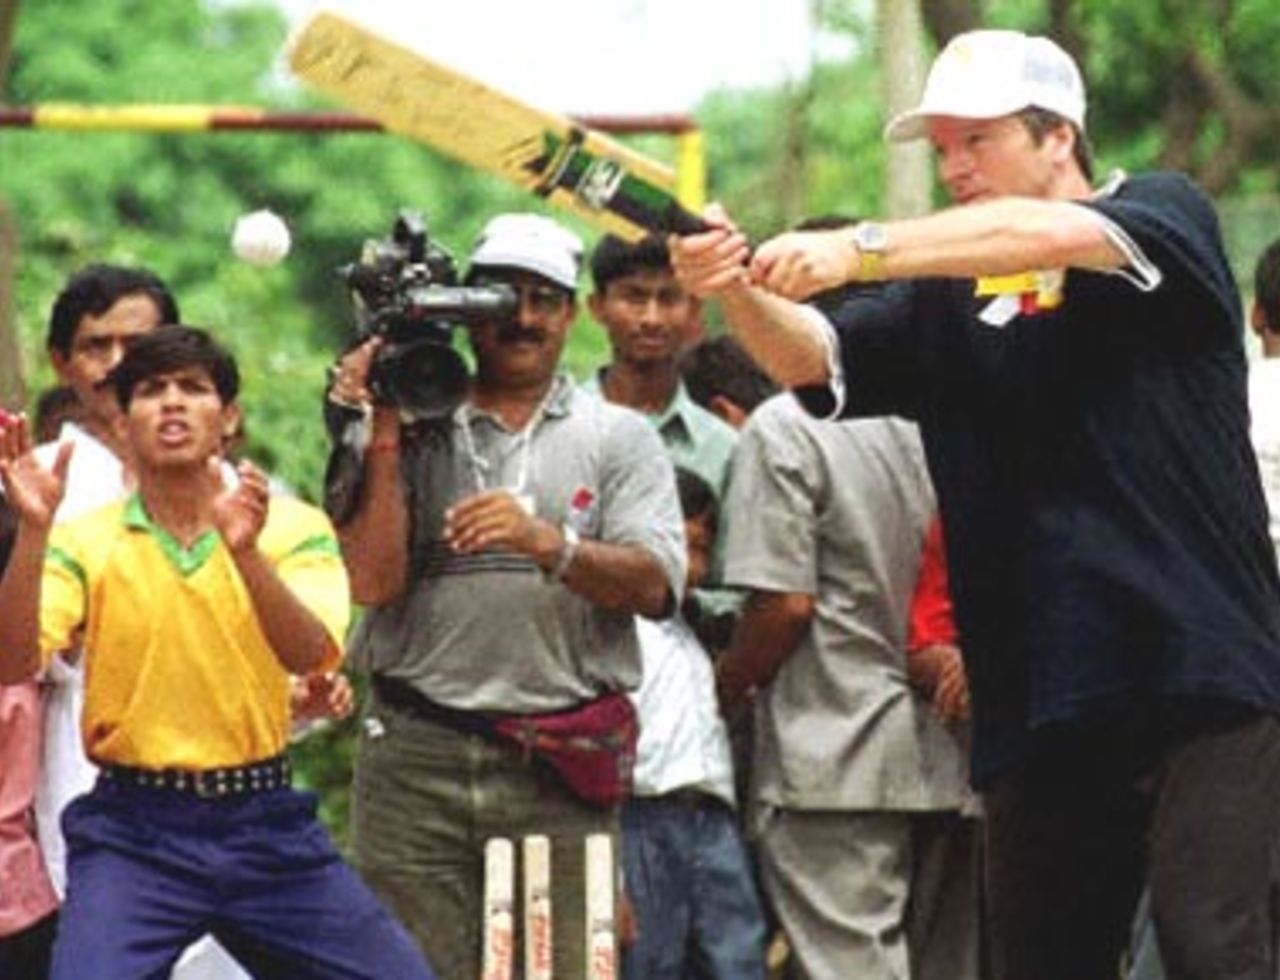 Steve Waugh, the Australian skipper, plays cricket with the local school boys at Udayan, a home children in Barrackpore 20 April 2000. Steve Waugh came here to open a new girls wing at Udayan, which is a home for destitute children of the leprosy patients. He has extended his support for the home since couple of years.